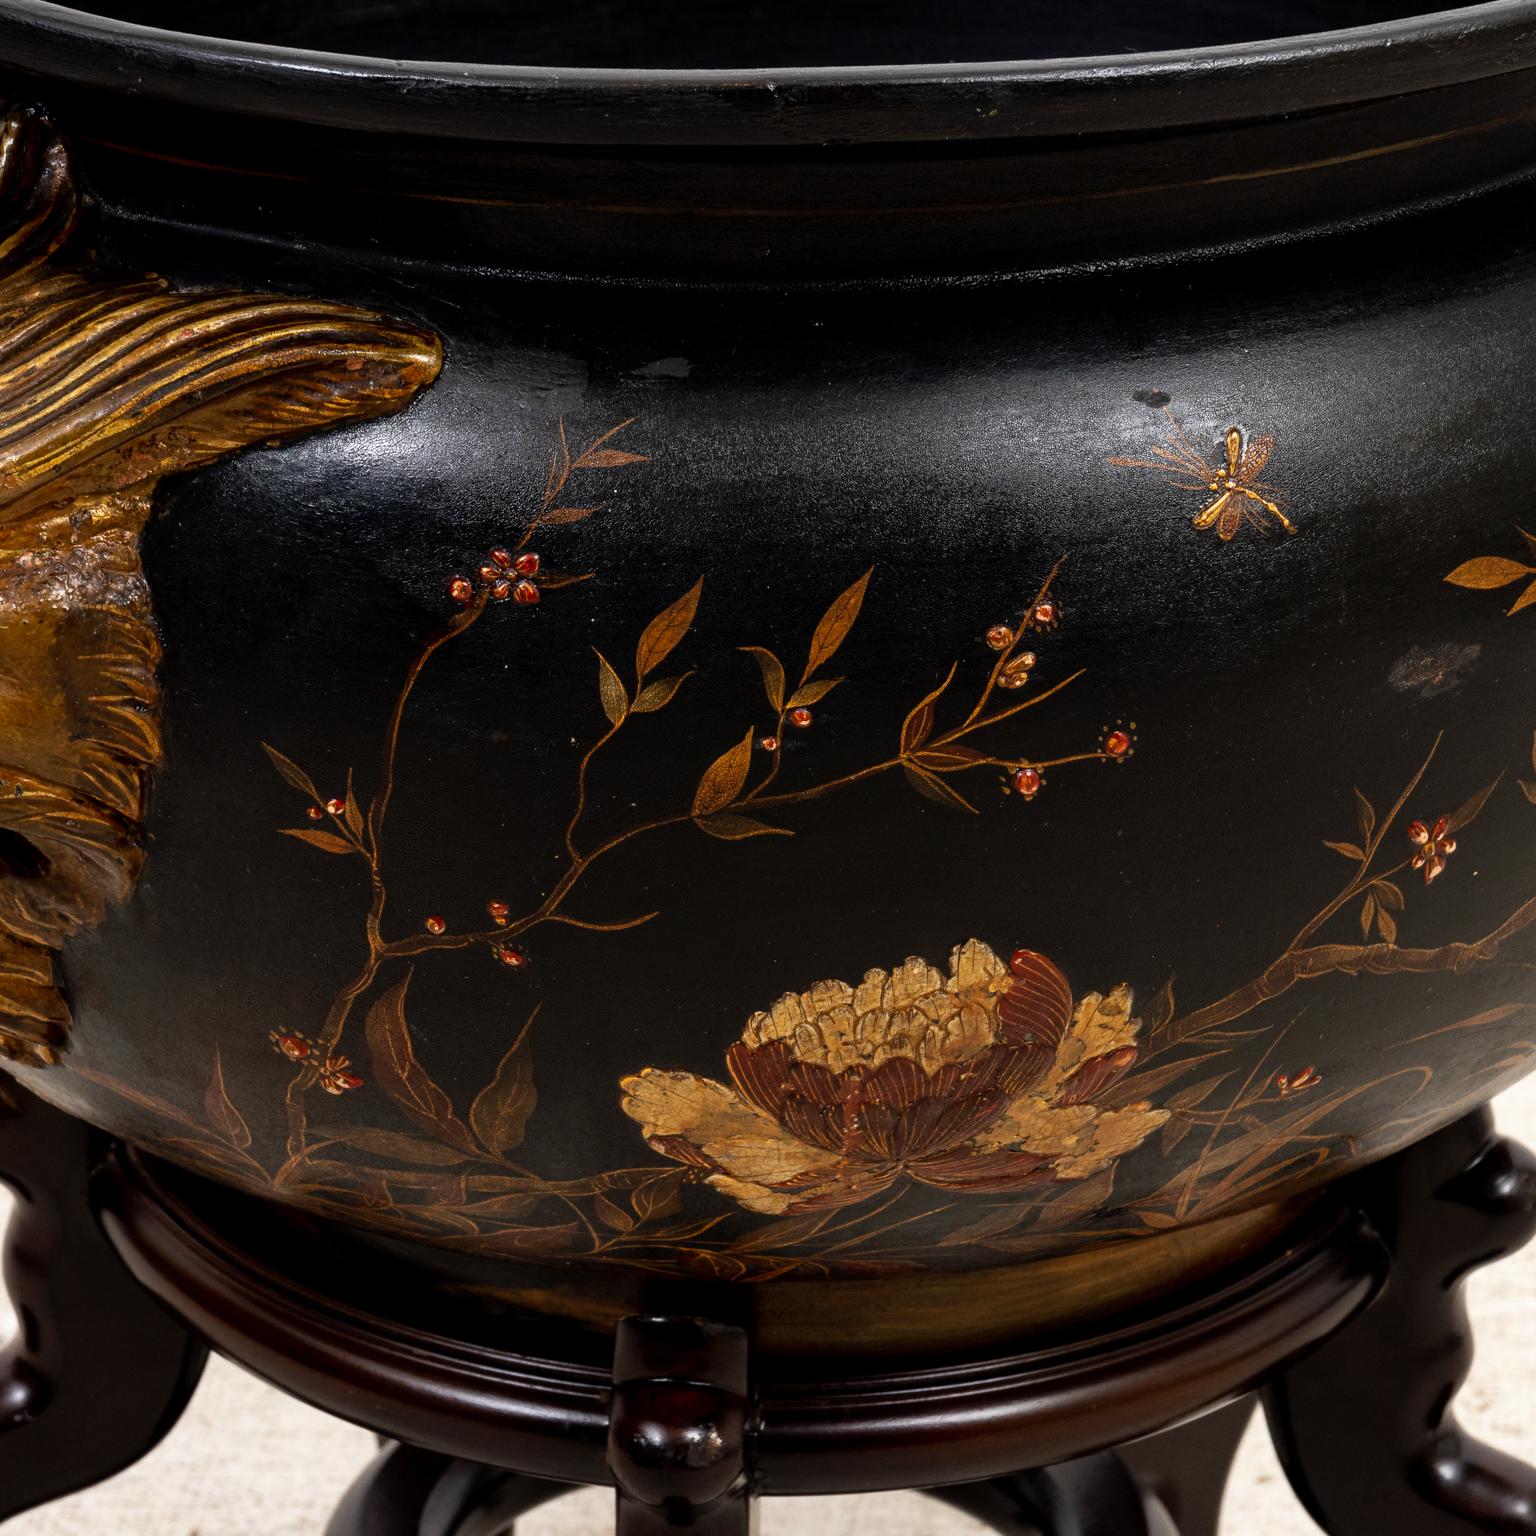 Circa 1900 French gilt and polychrome japanned terracotta jardinière with raised gilt and lacquered designs of cranes and ducks. Please note of wear consistent with age. Inside repainted and rim chip repaired.